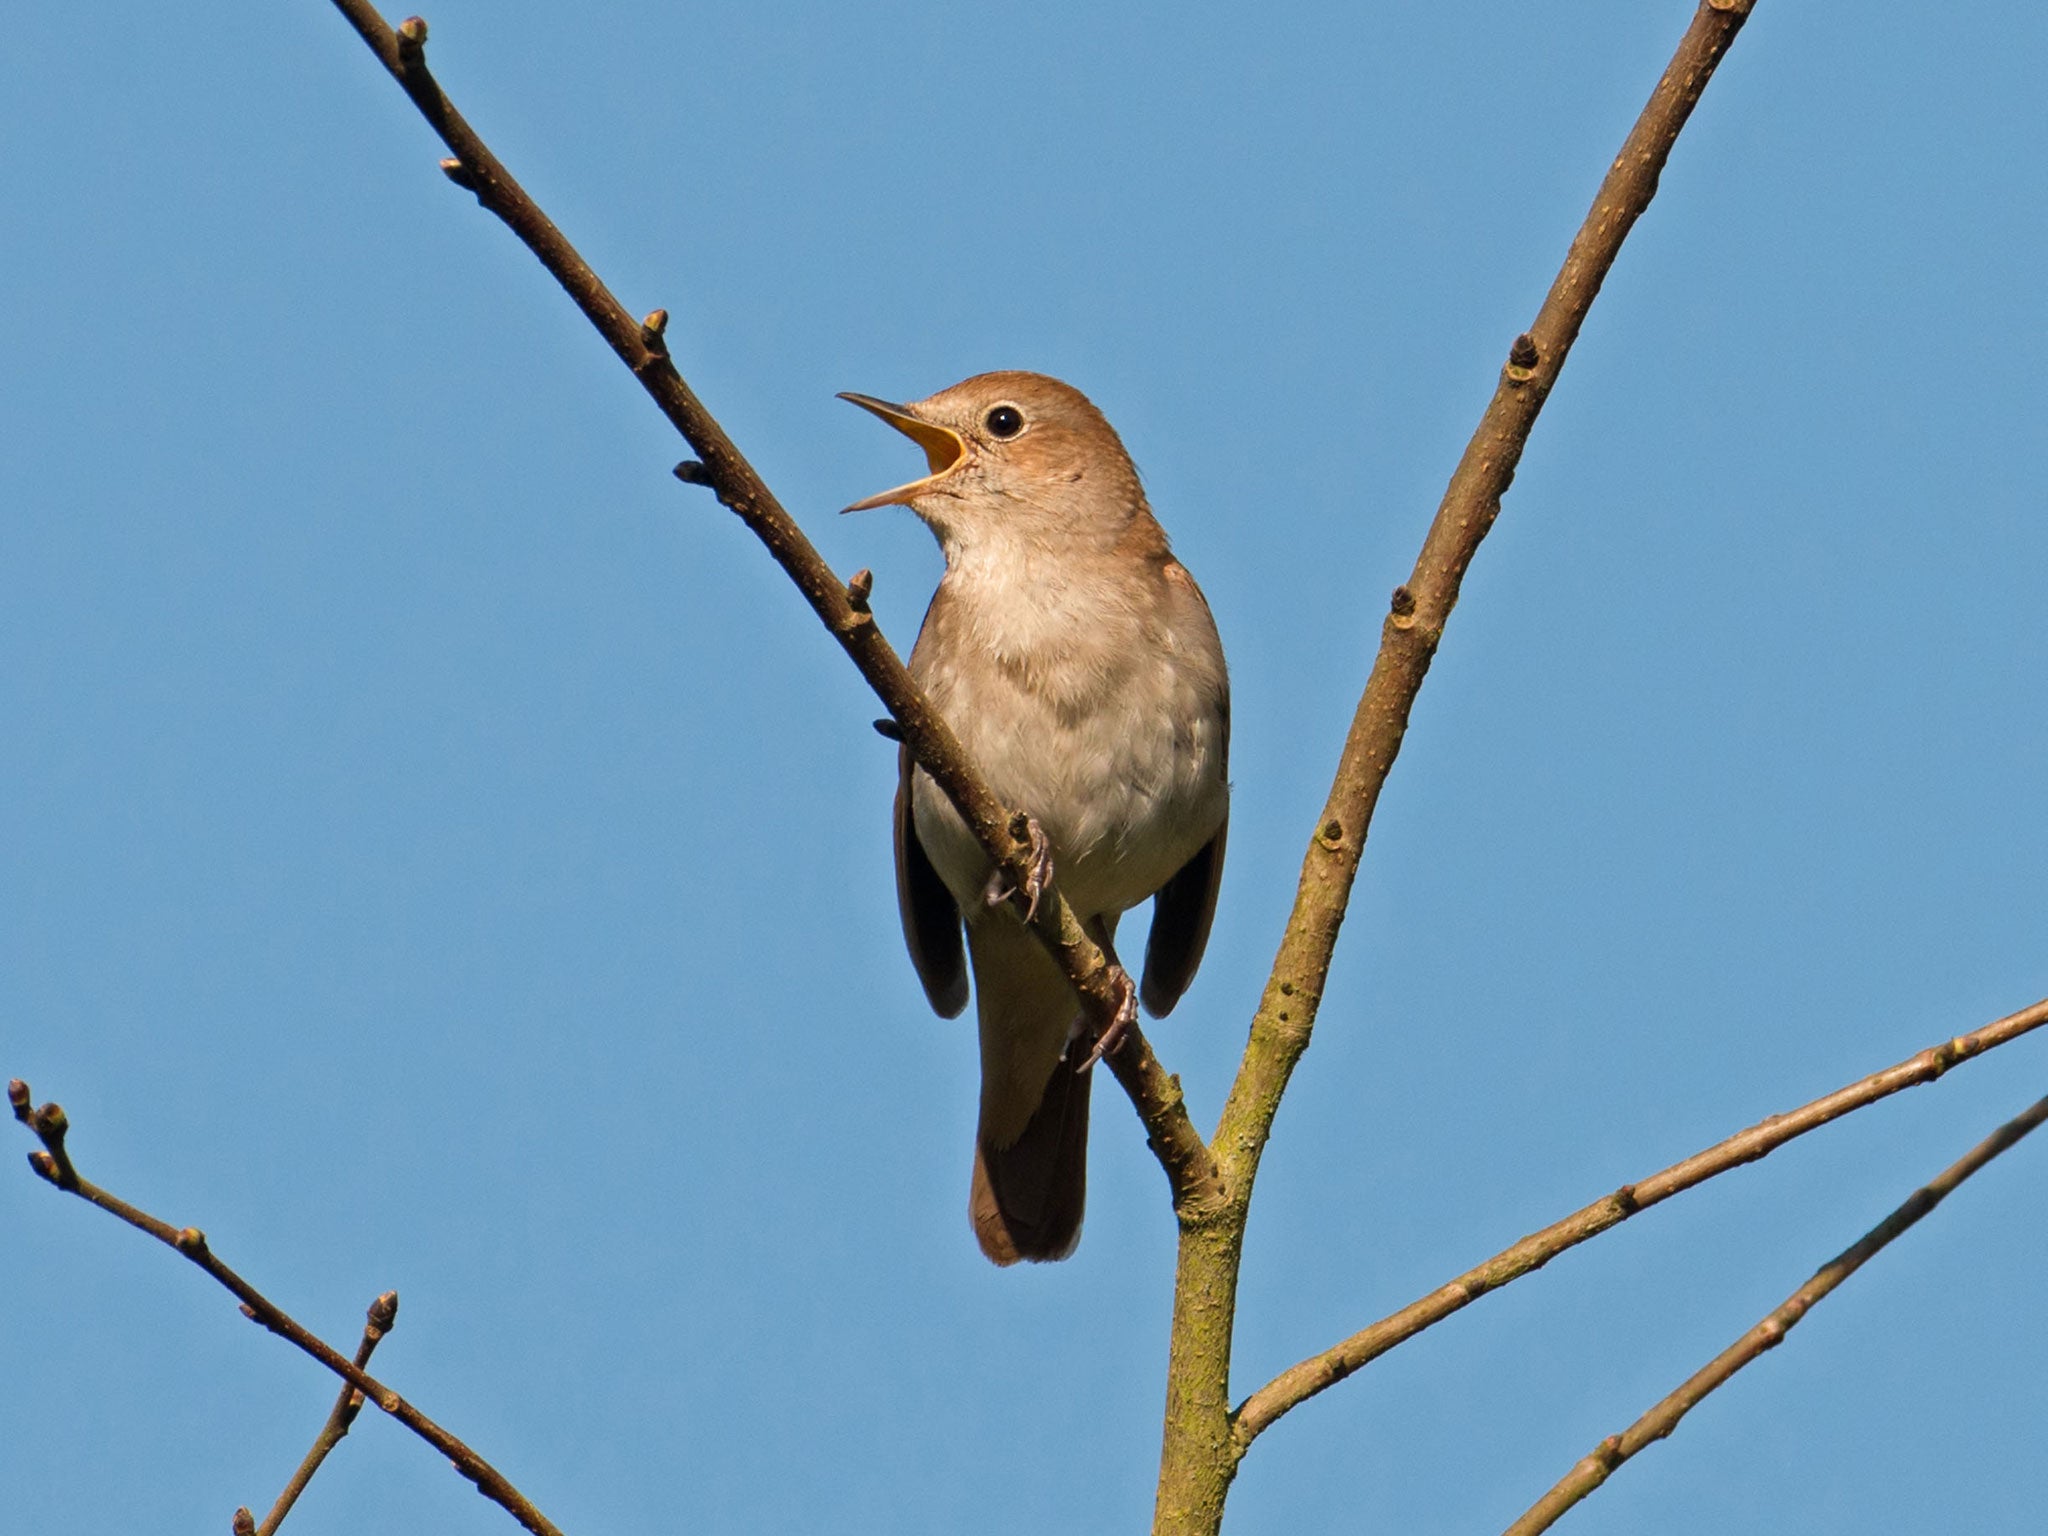 Young male nightingales are no match for their older counterparts